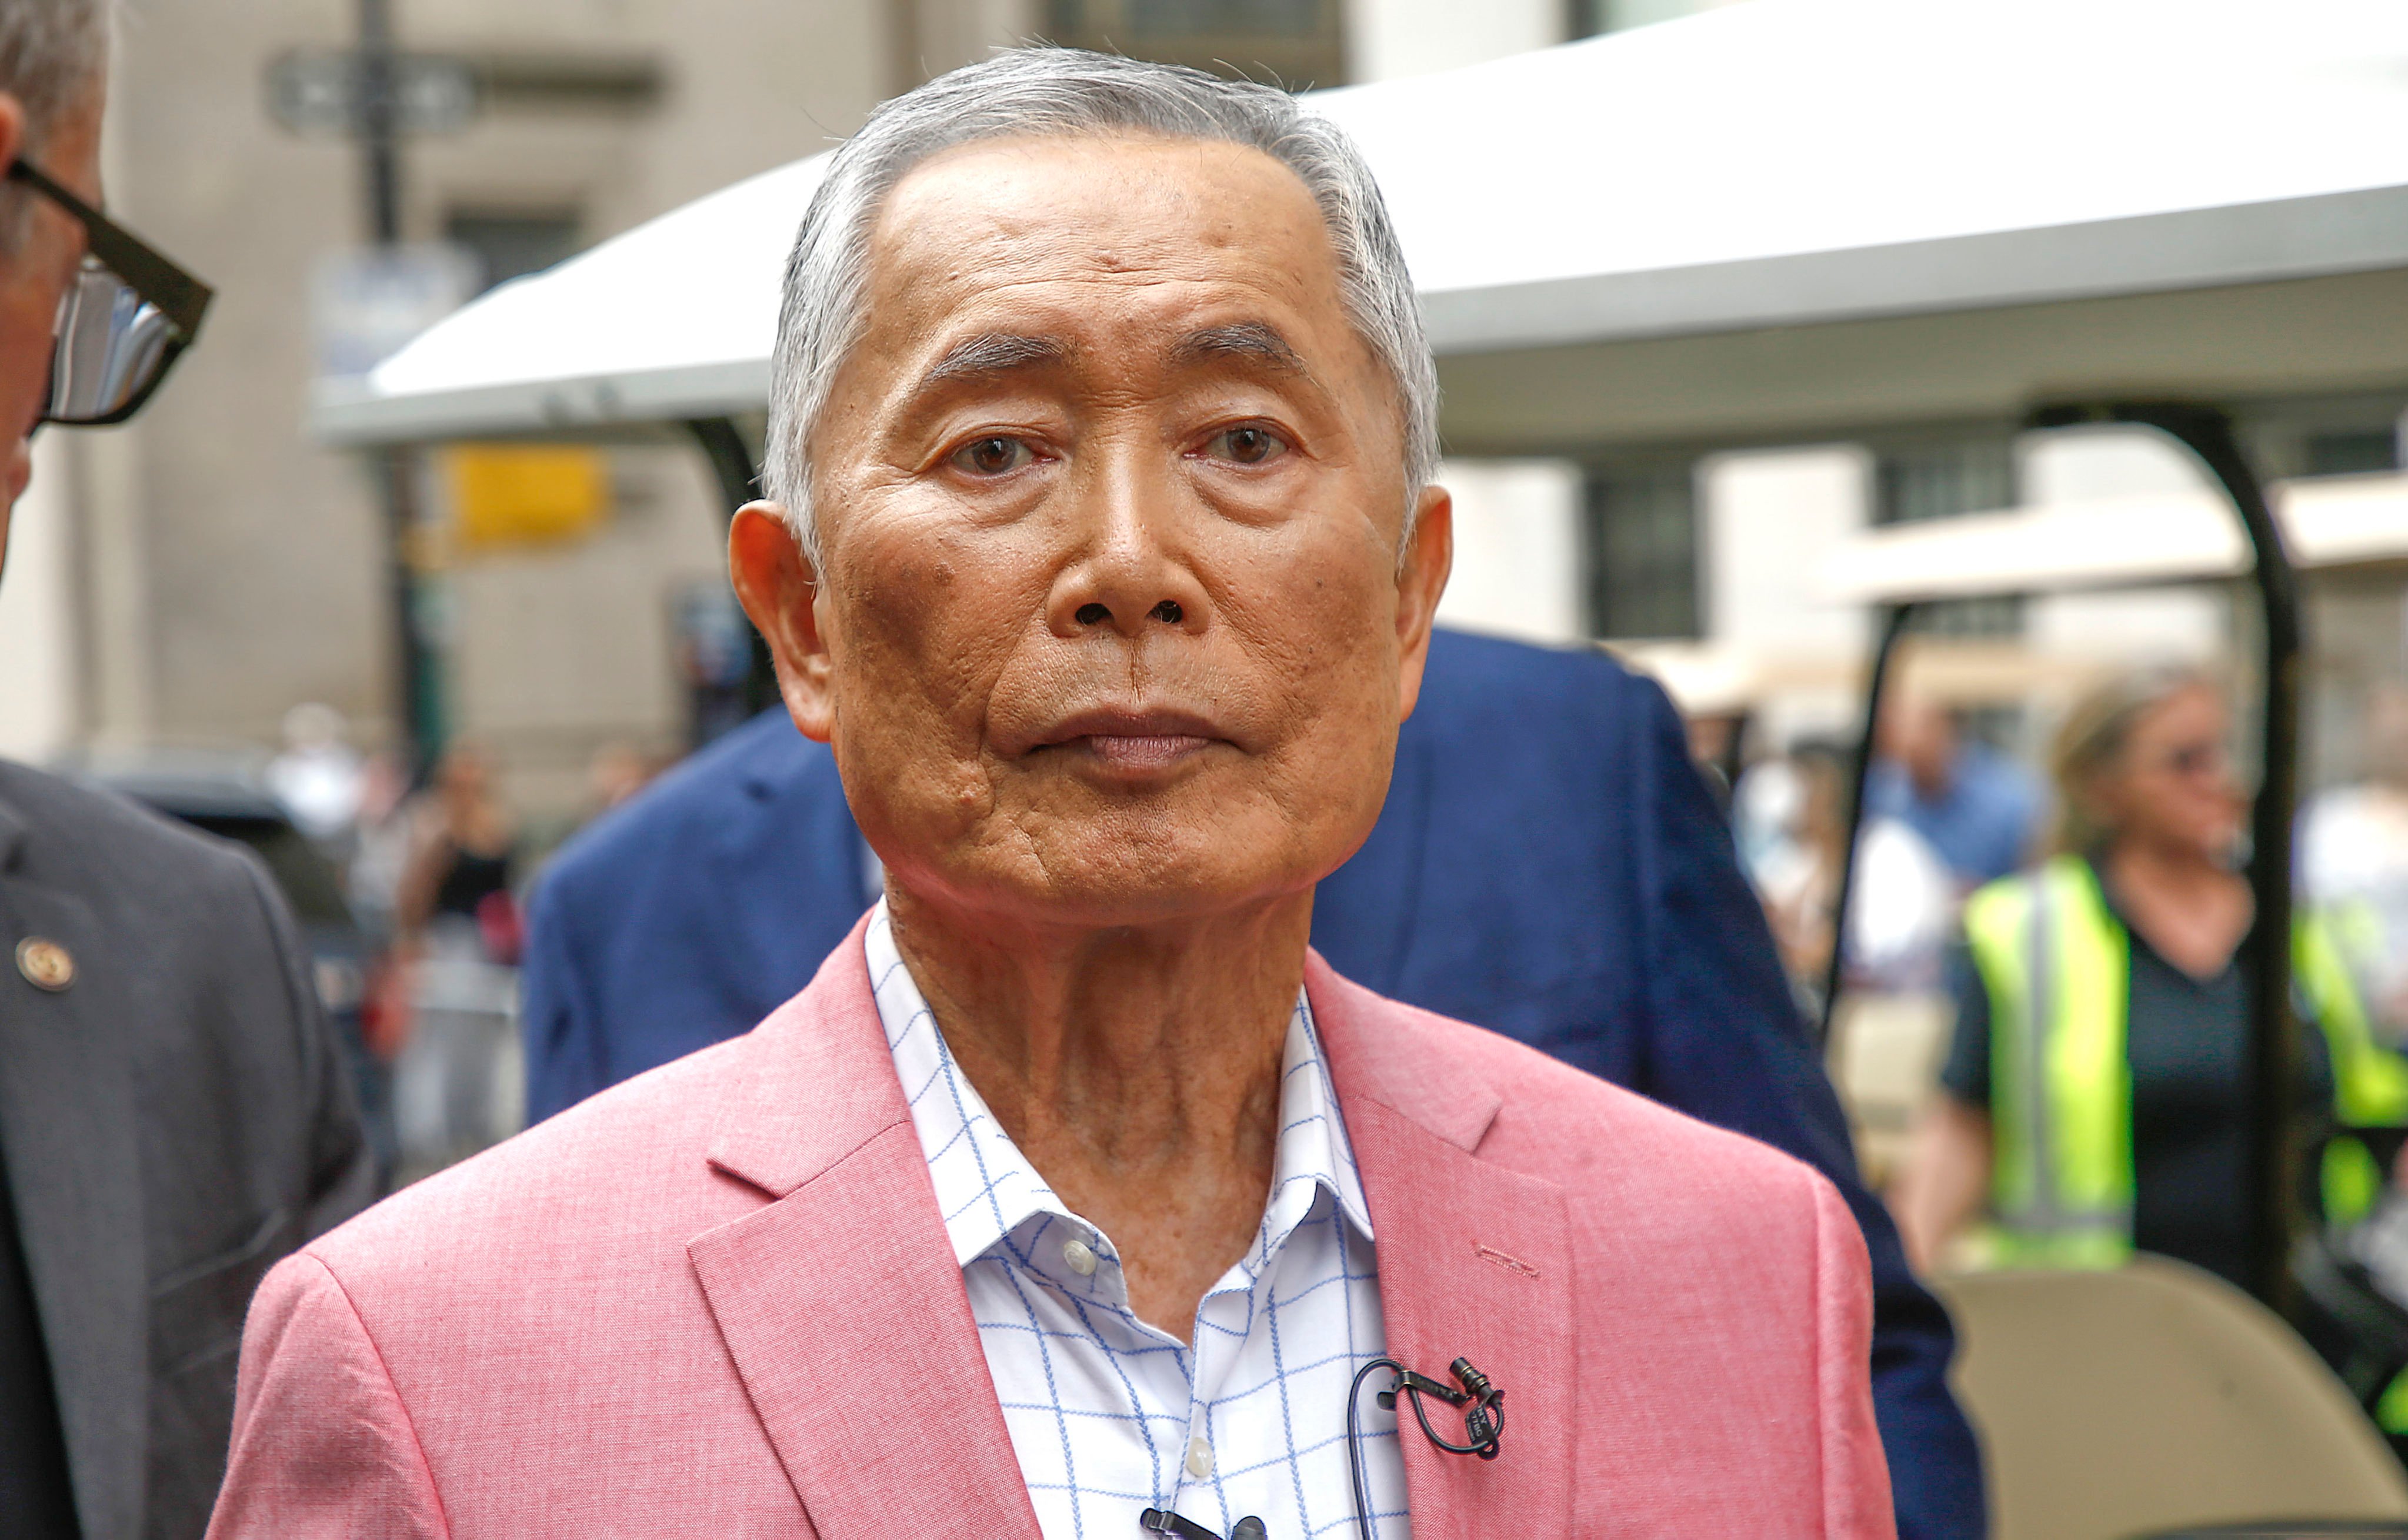 In his new children’s book, Star Trek actor George Takei details the three years he spent in internment camps as a child during the second world war. Photo: Getty Images